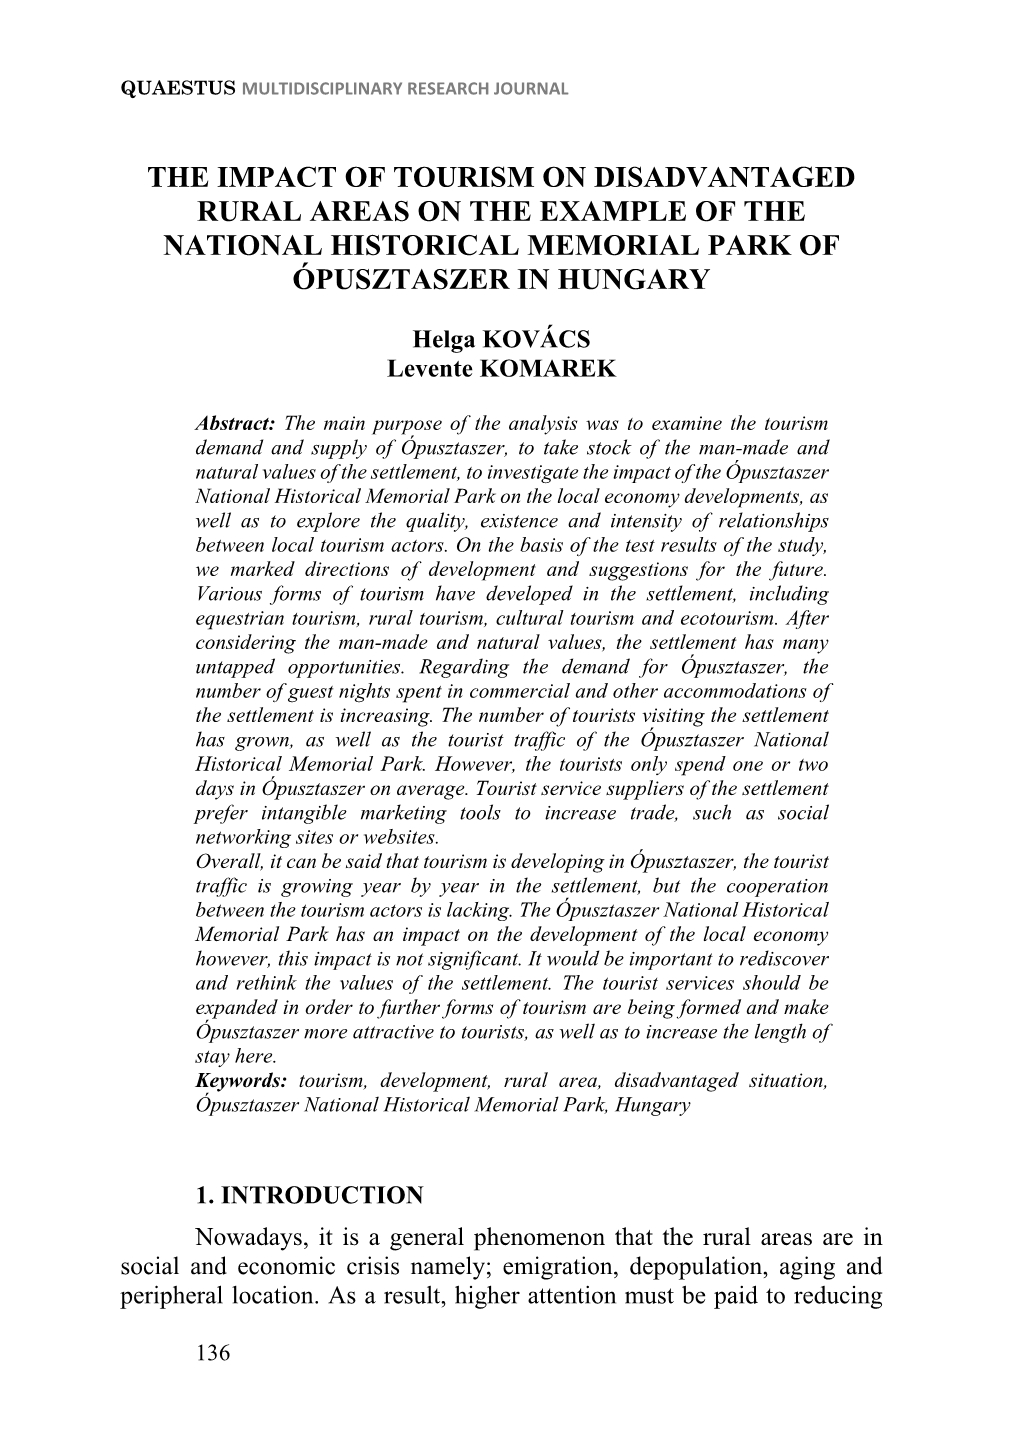 The Impact of Tourism on Disadvantaged Rural Areas on the Example of the National Historical Memorial Park of Ópusztaszer in Hungary